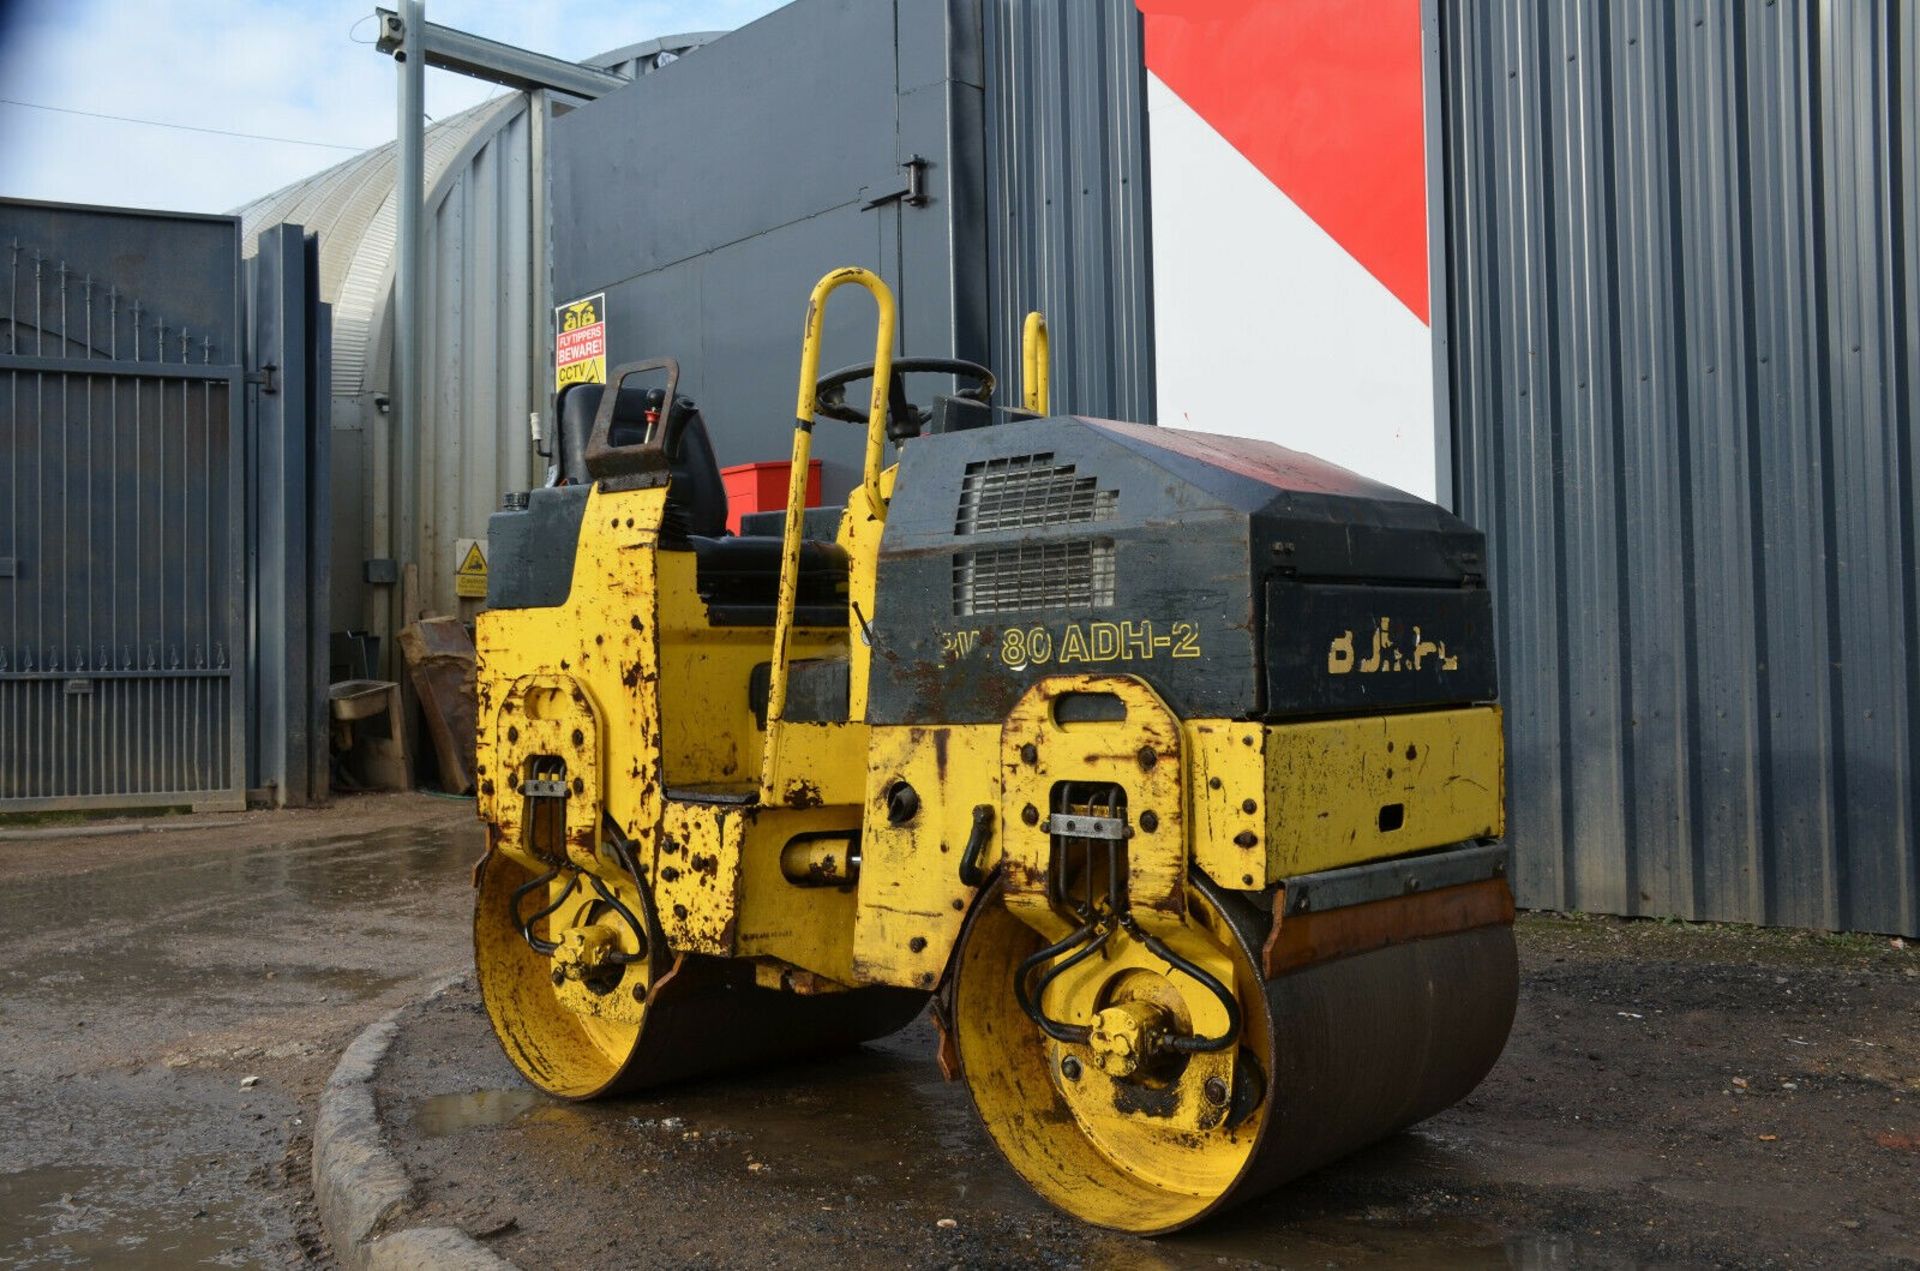 Bomag BW 80 AD-2 Roller - Image 2 of 12